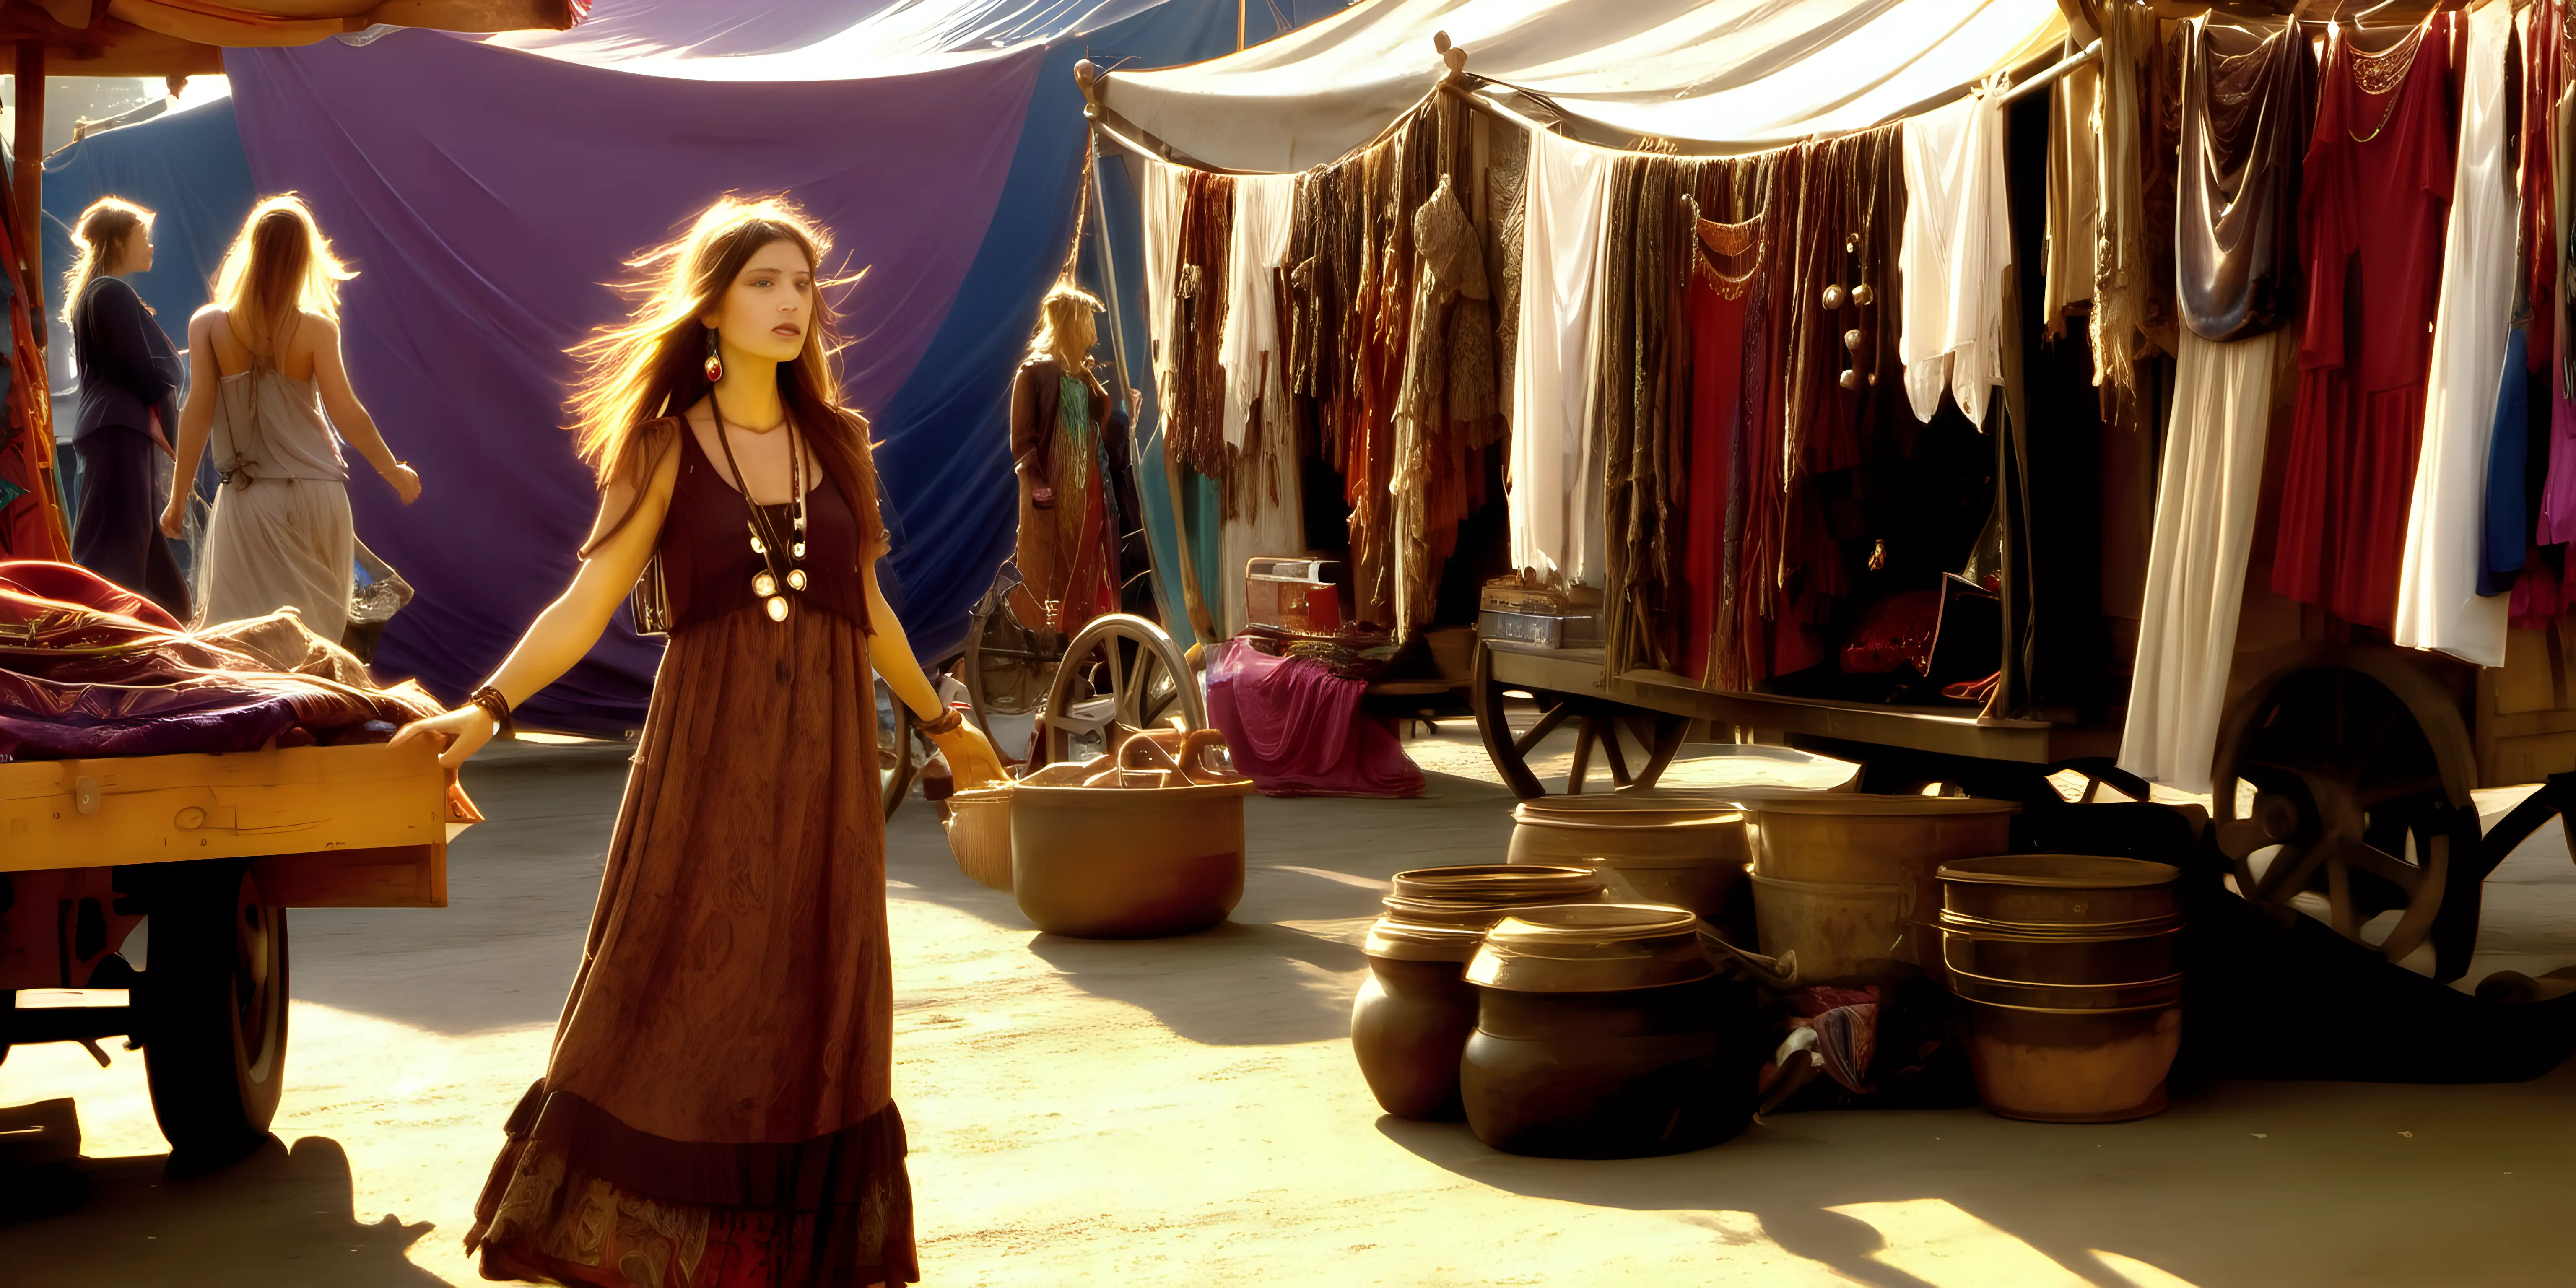 bohemian dreaming  at a clothing market, , there is a gypsy wagon in the background